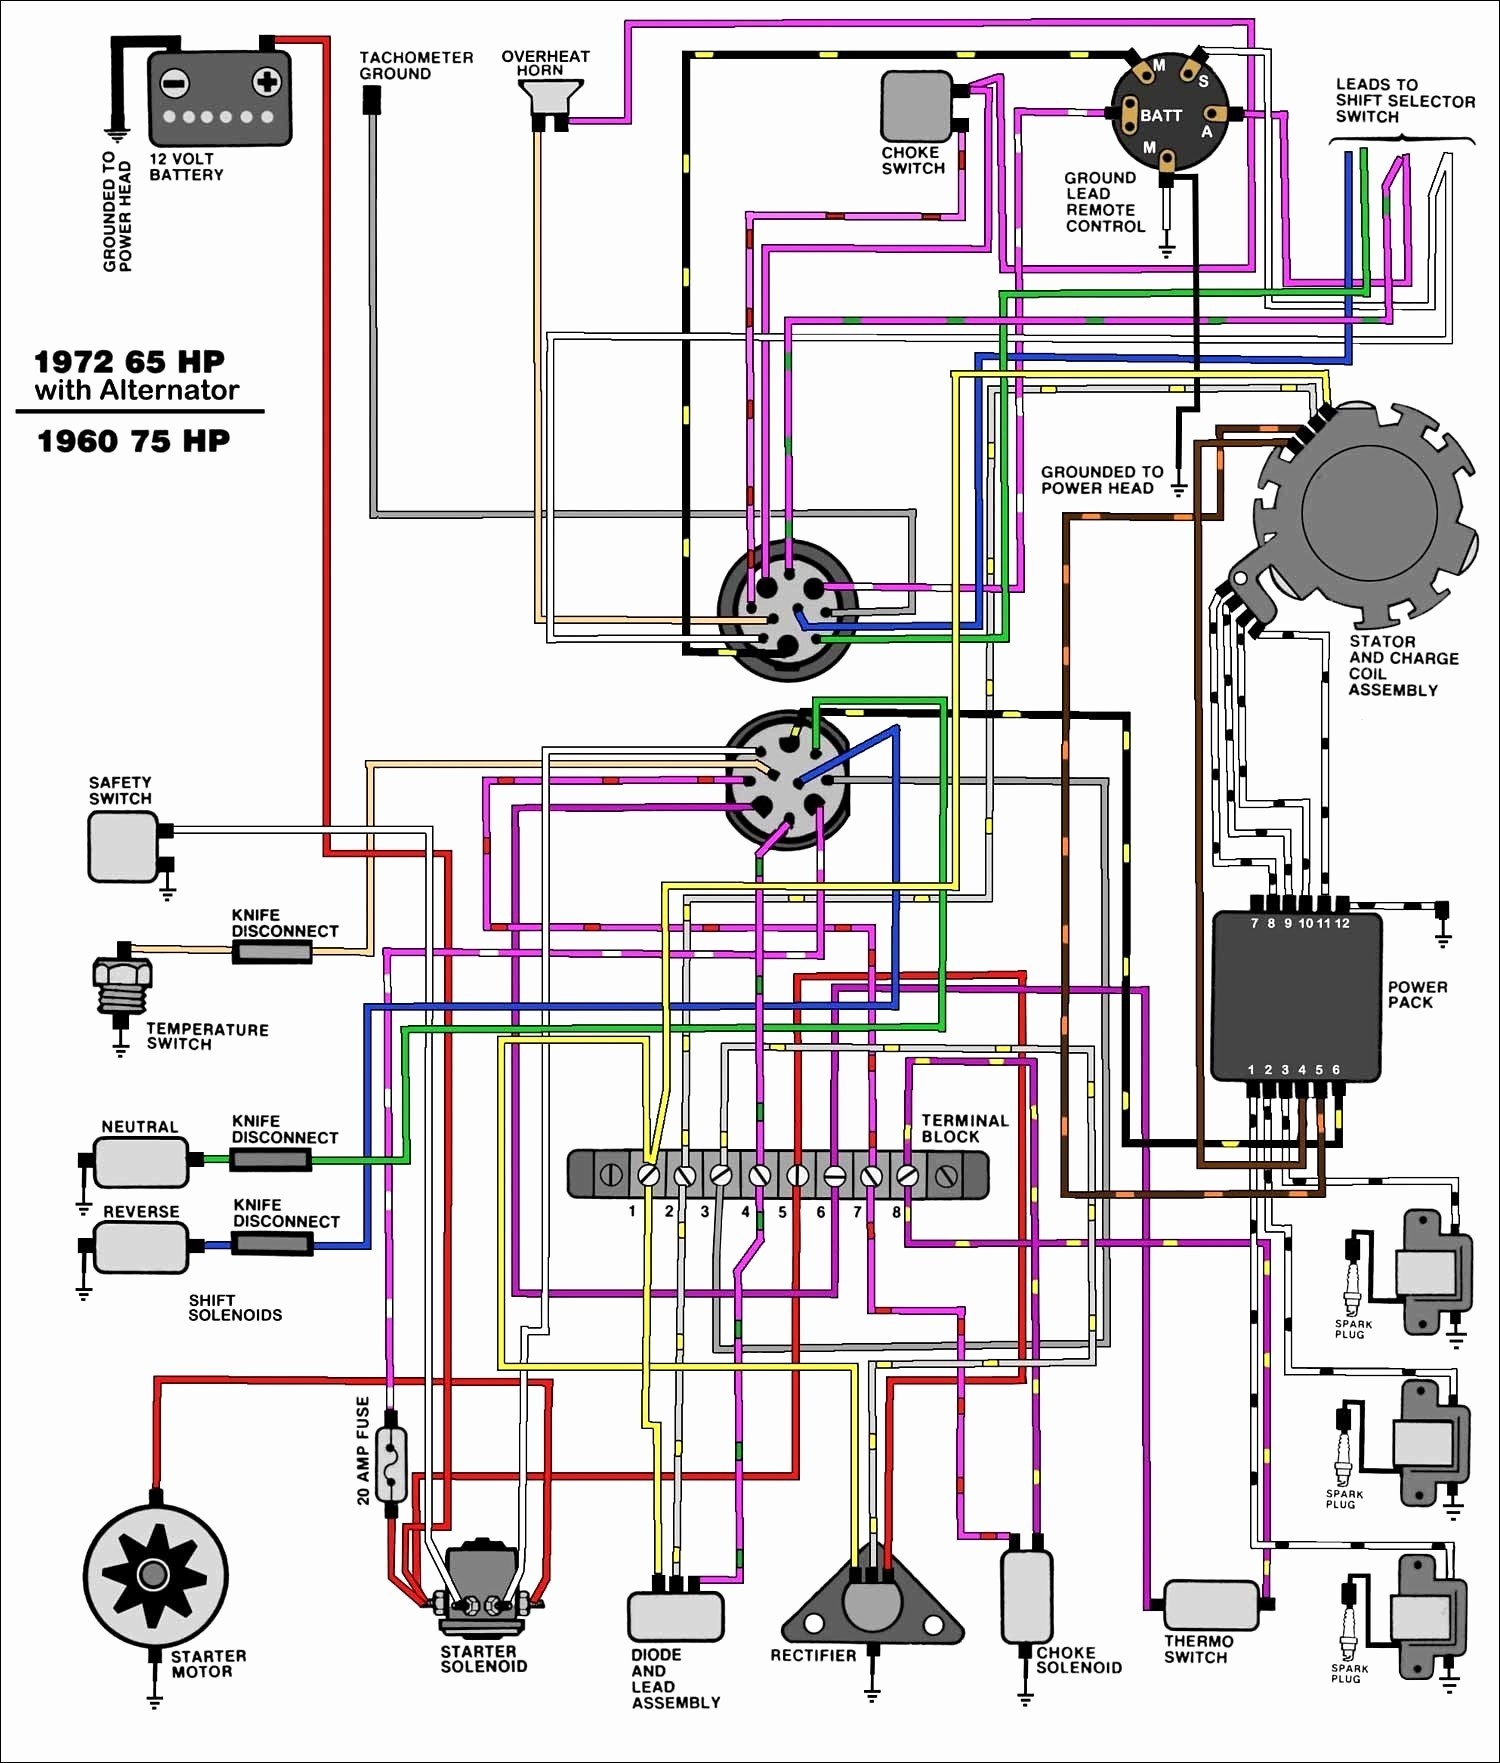 Wiring Diagram for Outboard Ignition Switch Best Evinrude Ignition Switch Wiring Diagram Unique Johnson Outboard